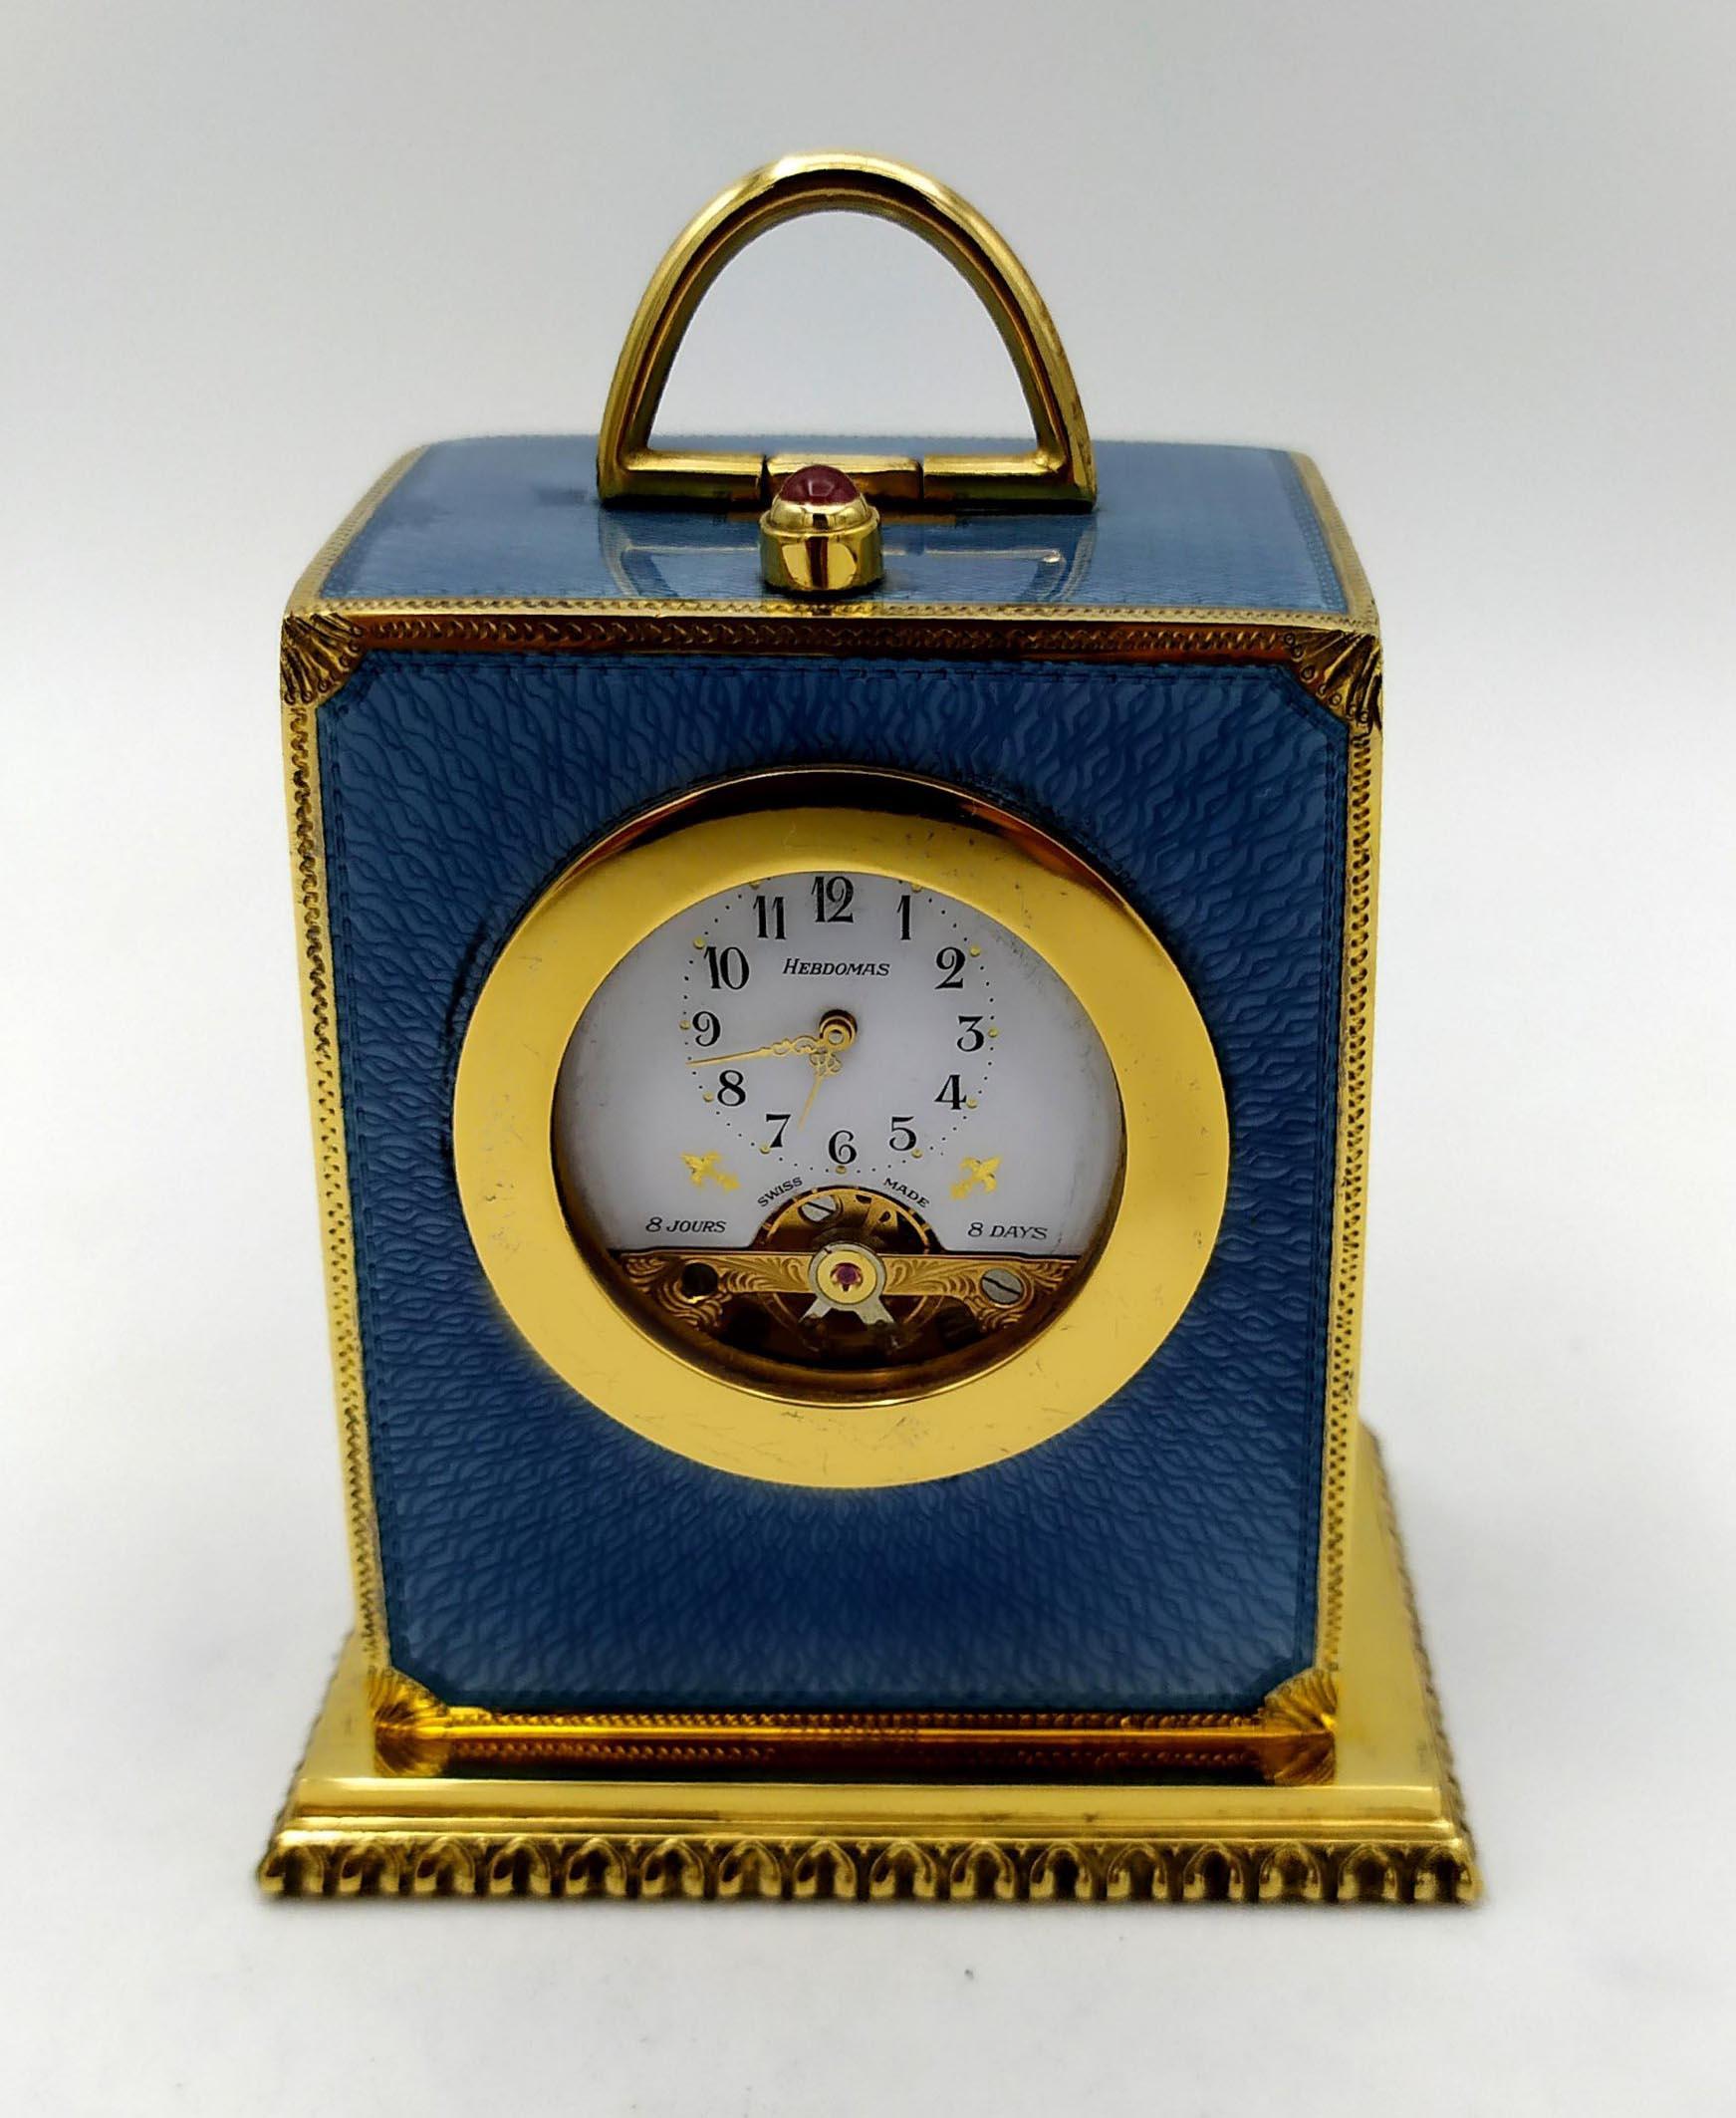 Small parallelepiped table clock in gilded 925/1000 silver with translucent enamel fired on guilloche on all sides, in Napoleon III French Empire style. Swiss mechanical movement “Hebdomas” with visible balance and 8-day winding. With round pink